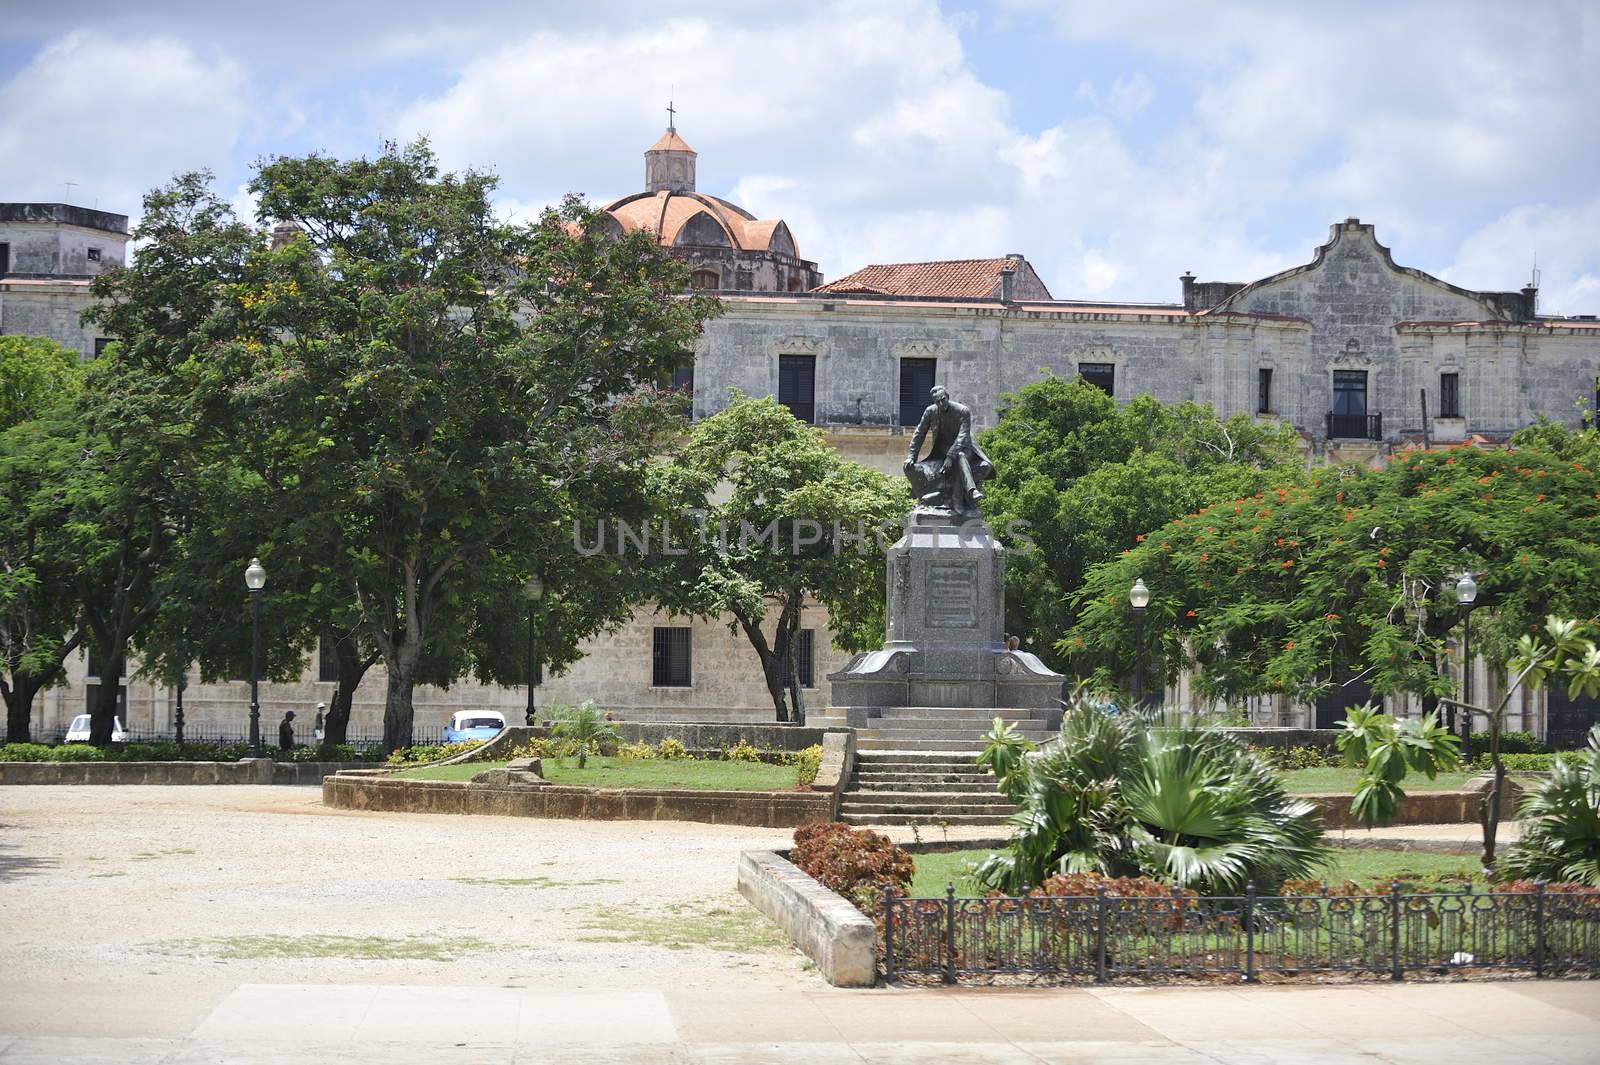 Center of the old Havana city in Cuba, view at the architectural monuments.